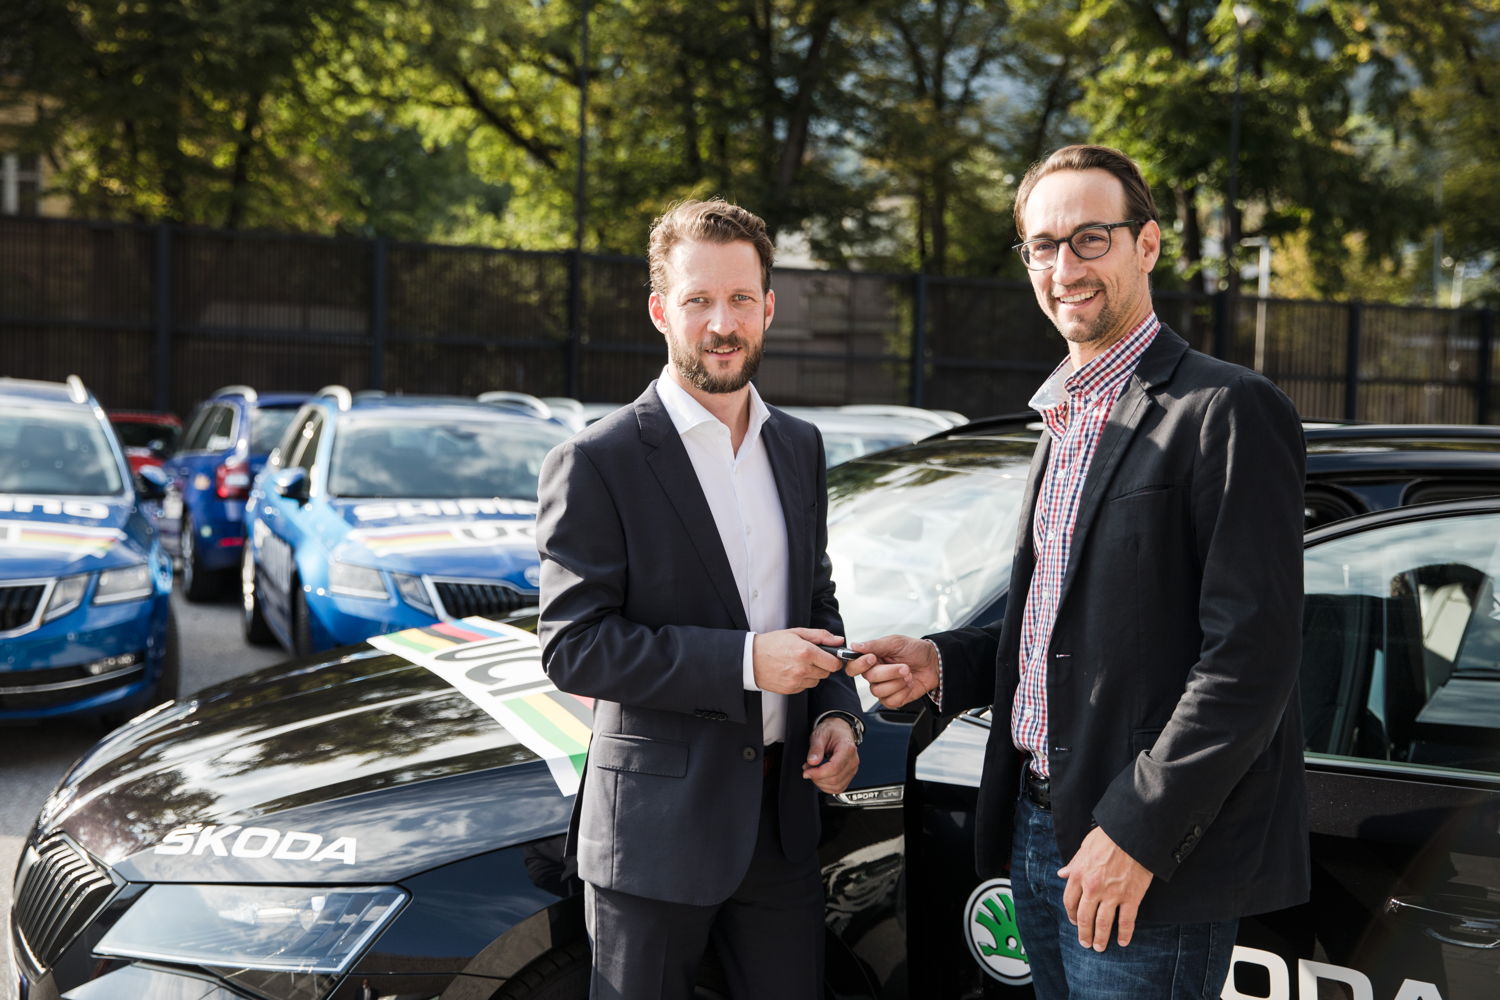 As the official Sponsor ŠKODA AUTO supports the UCI Road World Championship with a fleet of 122 vehicles. In the picture: Georg Spazier, head of the Organising Committee (Innsbruck-Tirol Rad WM 2018 GmbH) and Gregor Waidacher, representative of ŠKODA AUTO Austria (left).